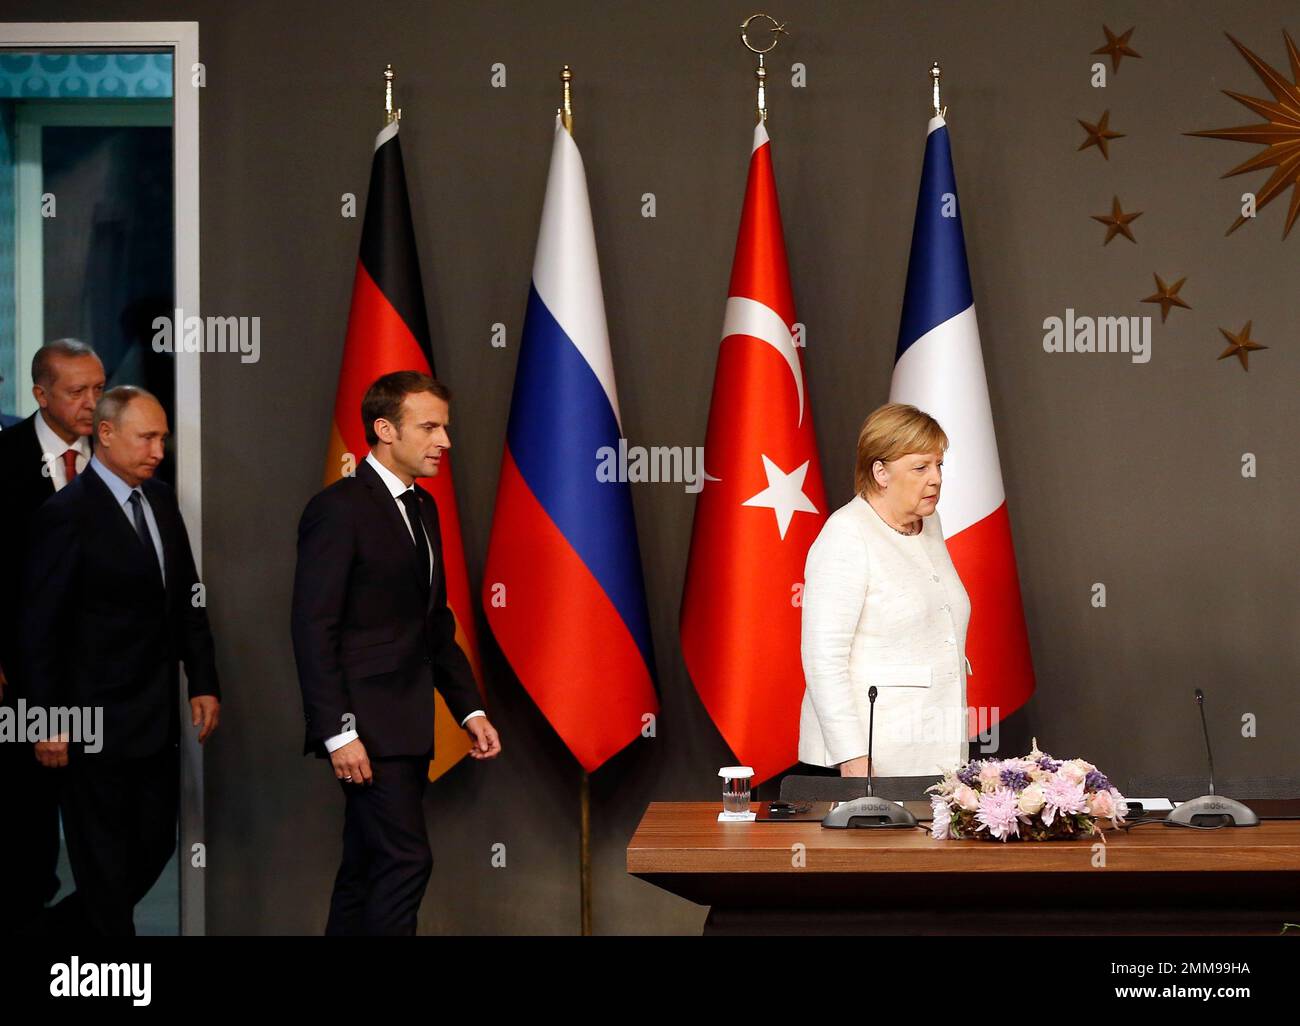 German Chancellor Angela Merkel, right, is followed by French President Emmanuel Macron, Russian President Vladimir Putin and Turkey's President Recep Tayyip Erdogan as they arrive for a news conference following their summit on Syria, in Istanbul, Saturday, Oct. 27, 2018. The leaders of Turkey, Russia, France and Germany were gathering for a summit Saturday in Istanbul about Syria, hoping to lay the groundwork for eventual peace in a country devastated by years of war. (AP Photo/Lefteris Pitarakis) Stock Photo